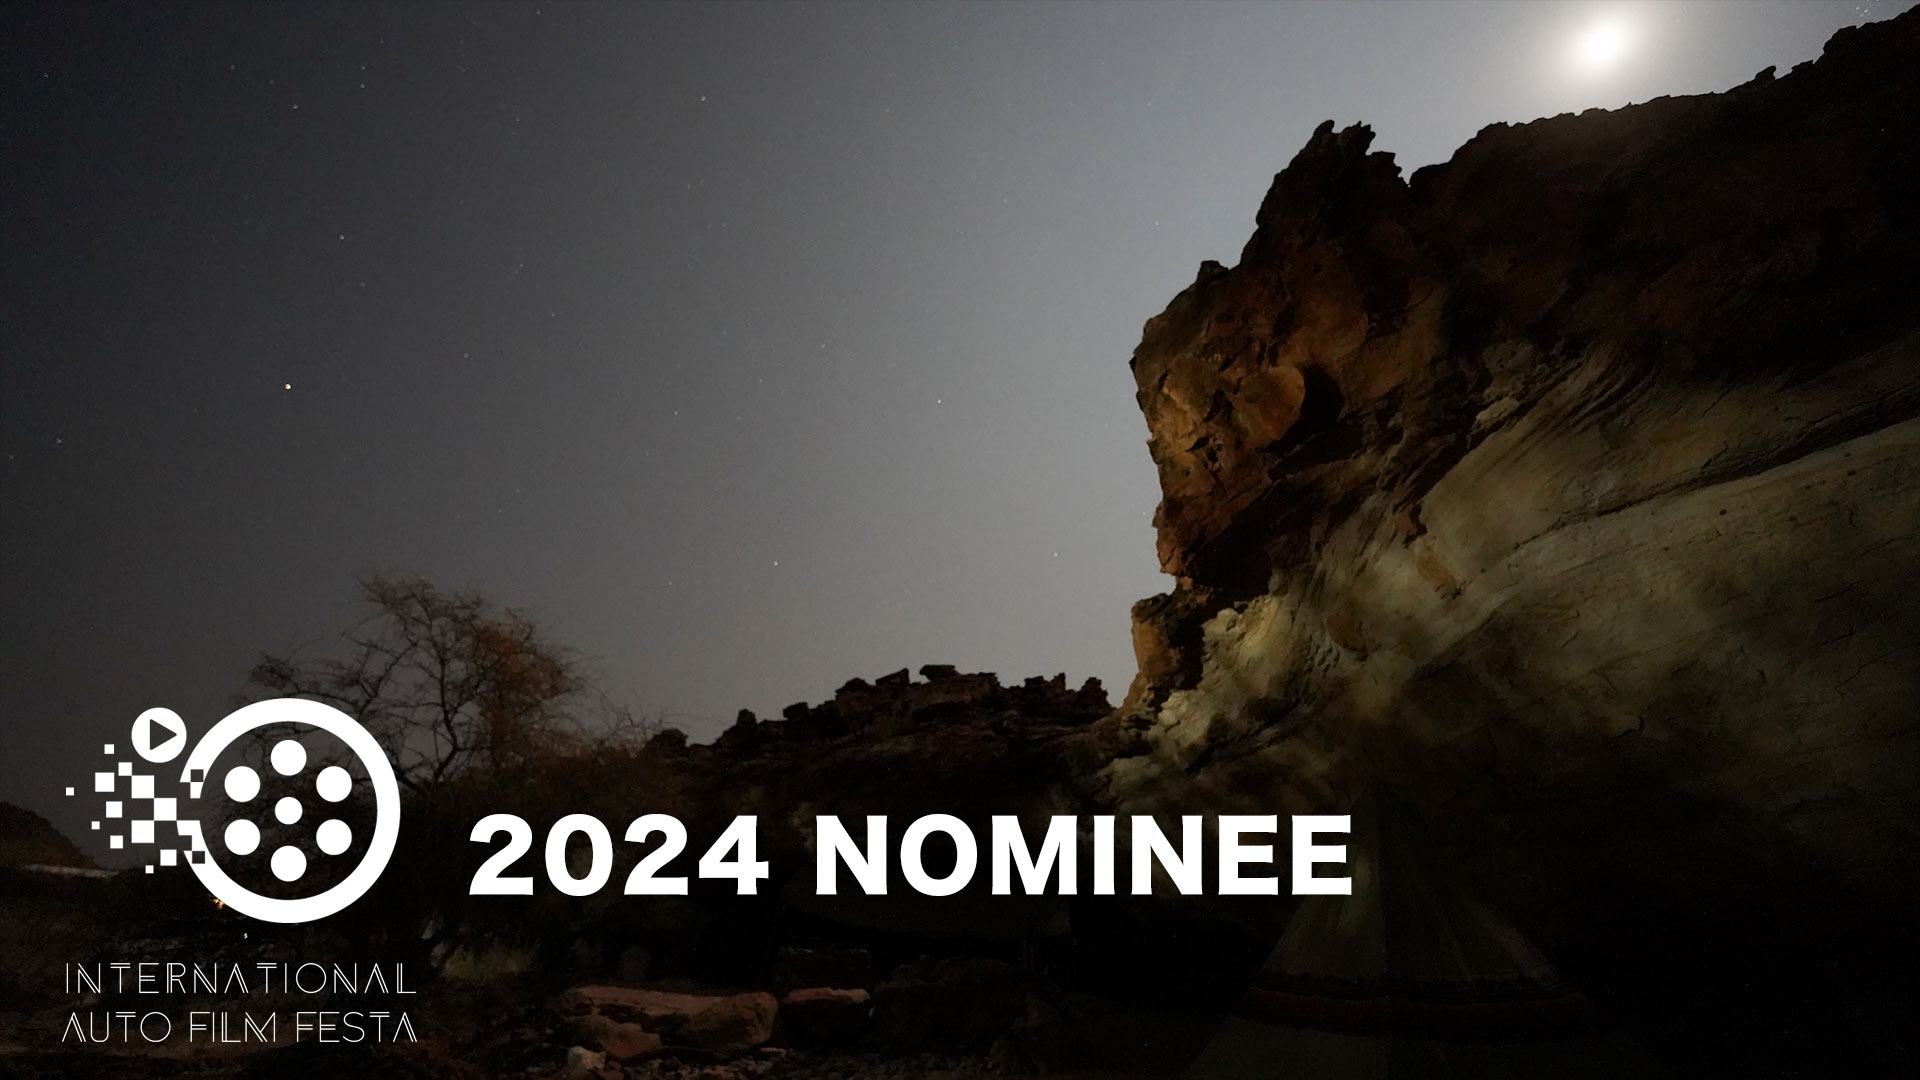 FLY ME TO THE DUNE [ 2024 / NOMINEE ]